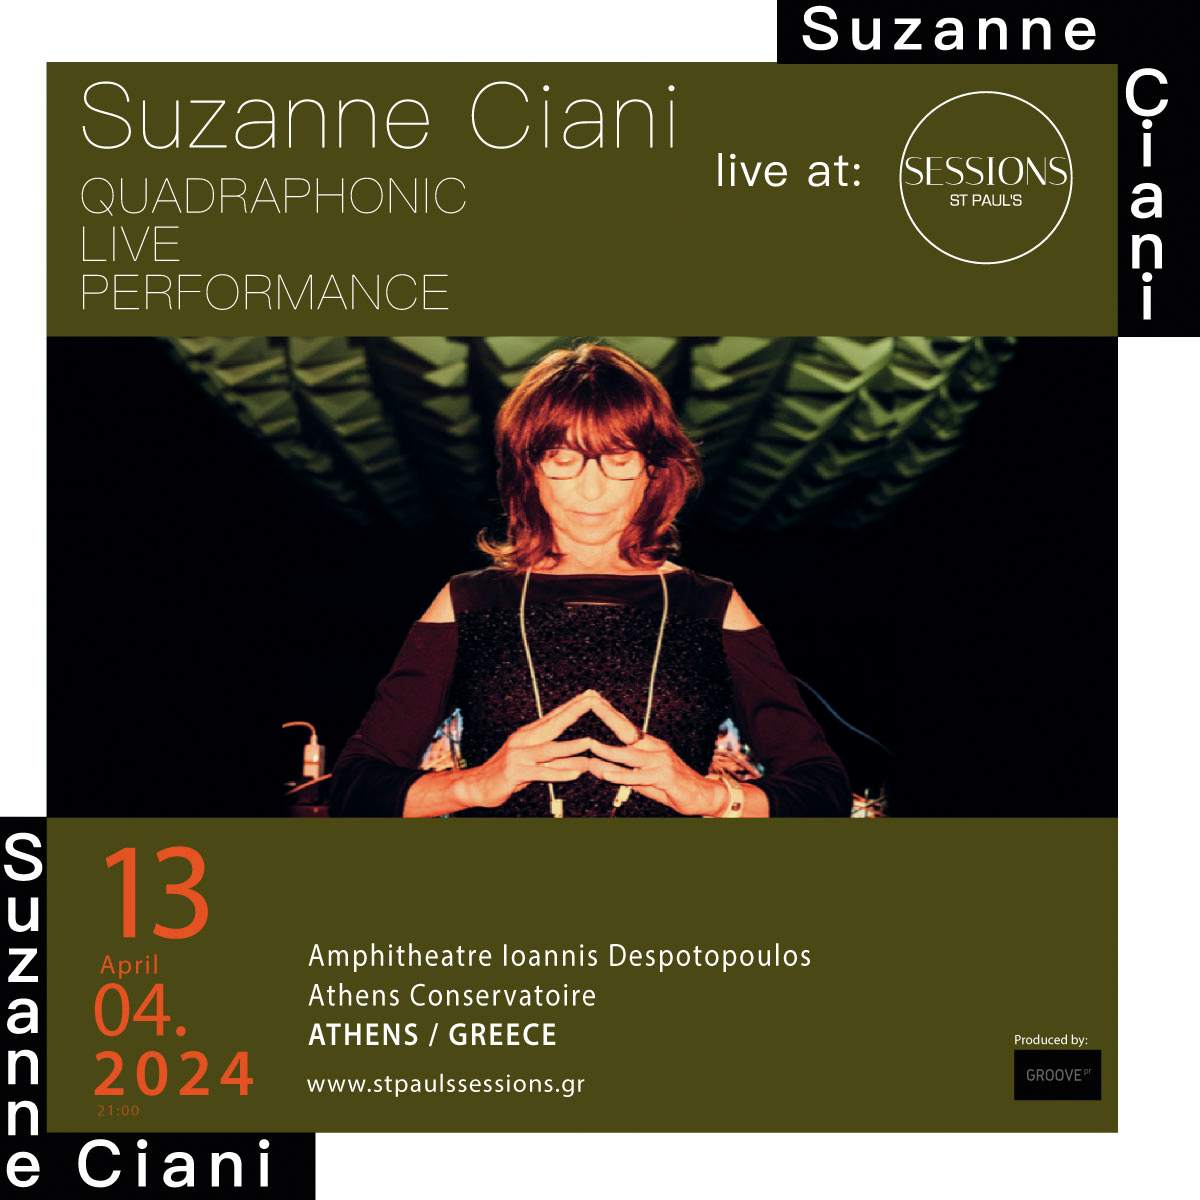 Suzanne Ciani live at St Paul's Sessions 6 - Página frontal